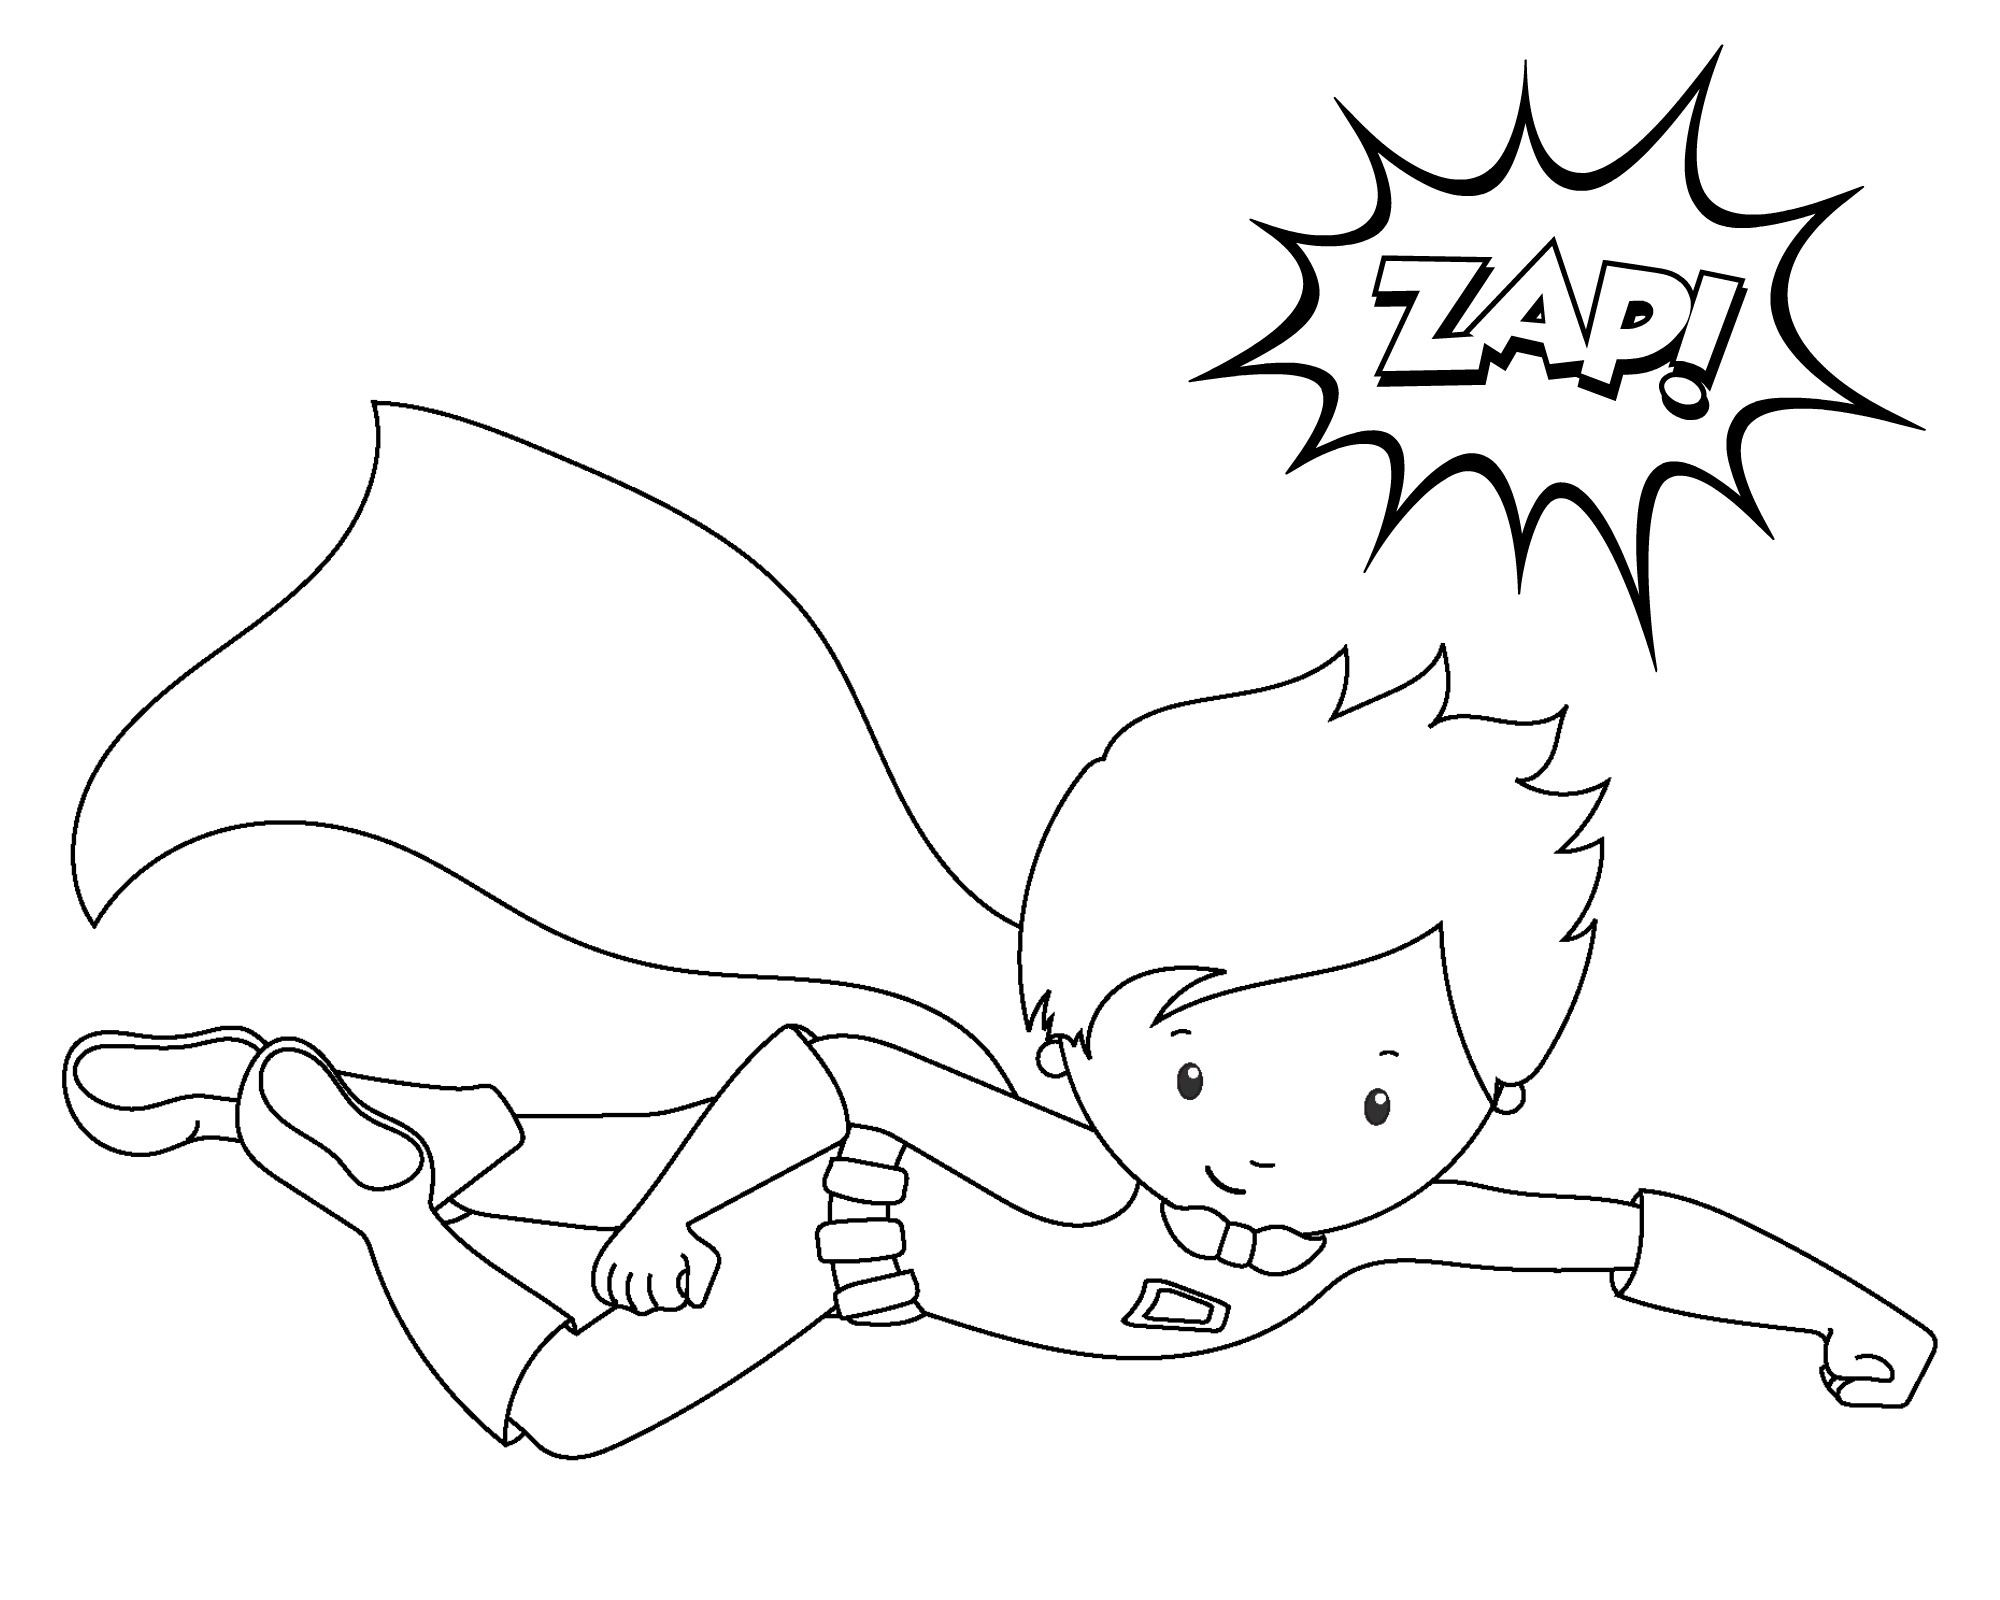 Free Printable Superhero Coloring Sheets For Kids - Crazy Little - Free Printable Superhero Coloring Pages